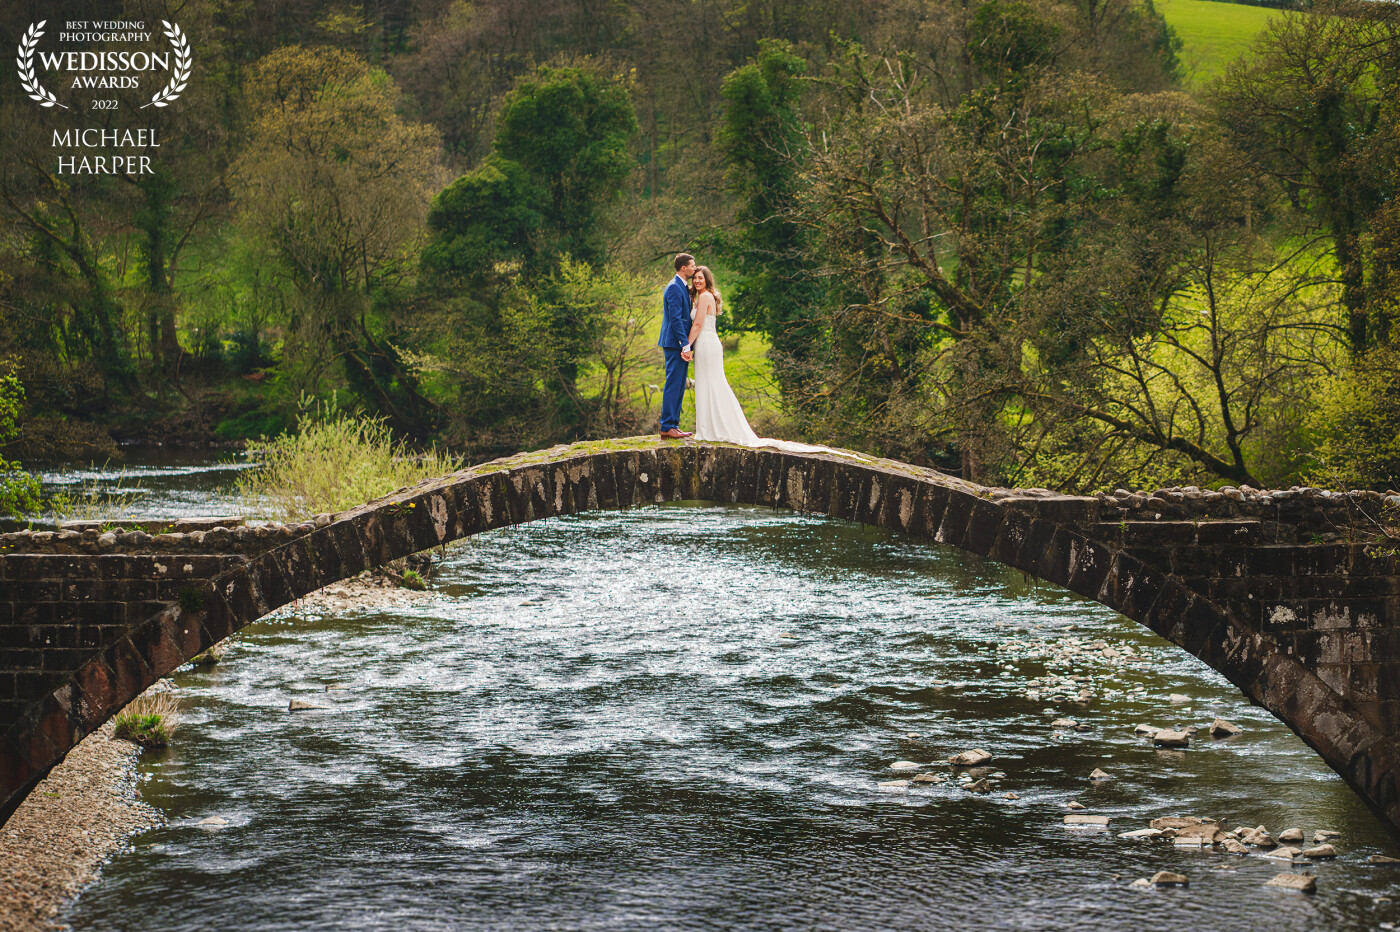 Just down the road from the Hobbit Hill venue is a beautiful bridge. With a planned long drinks reception this amazing couple were happy to take a little drive and pose for this epic photo!